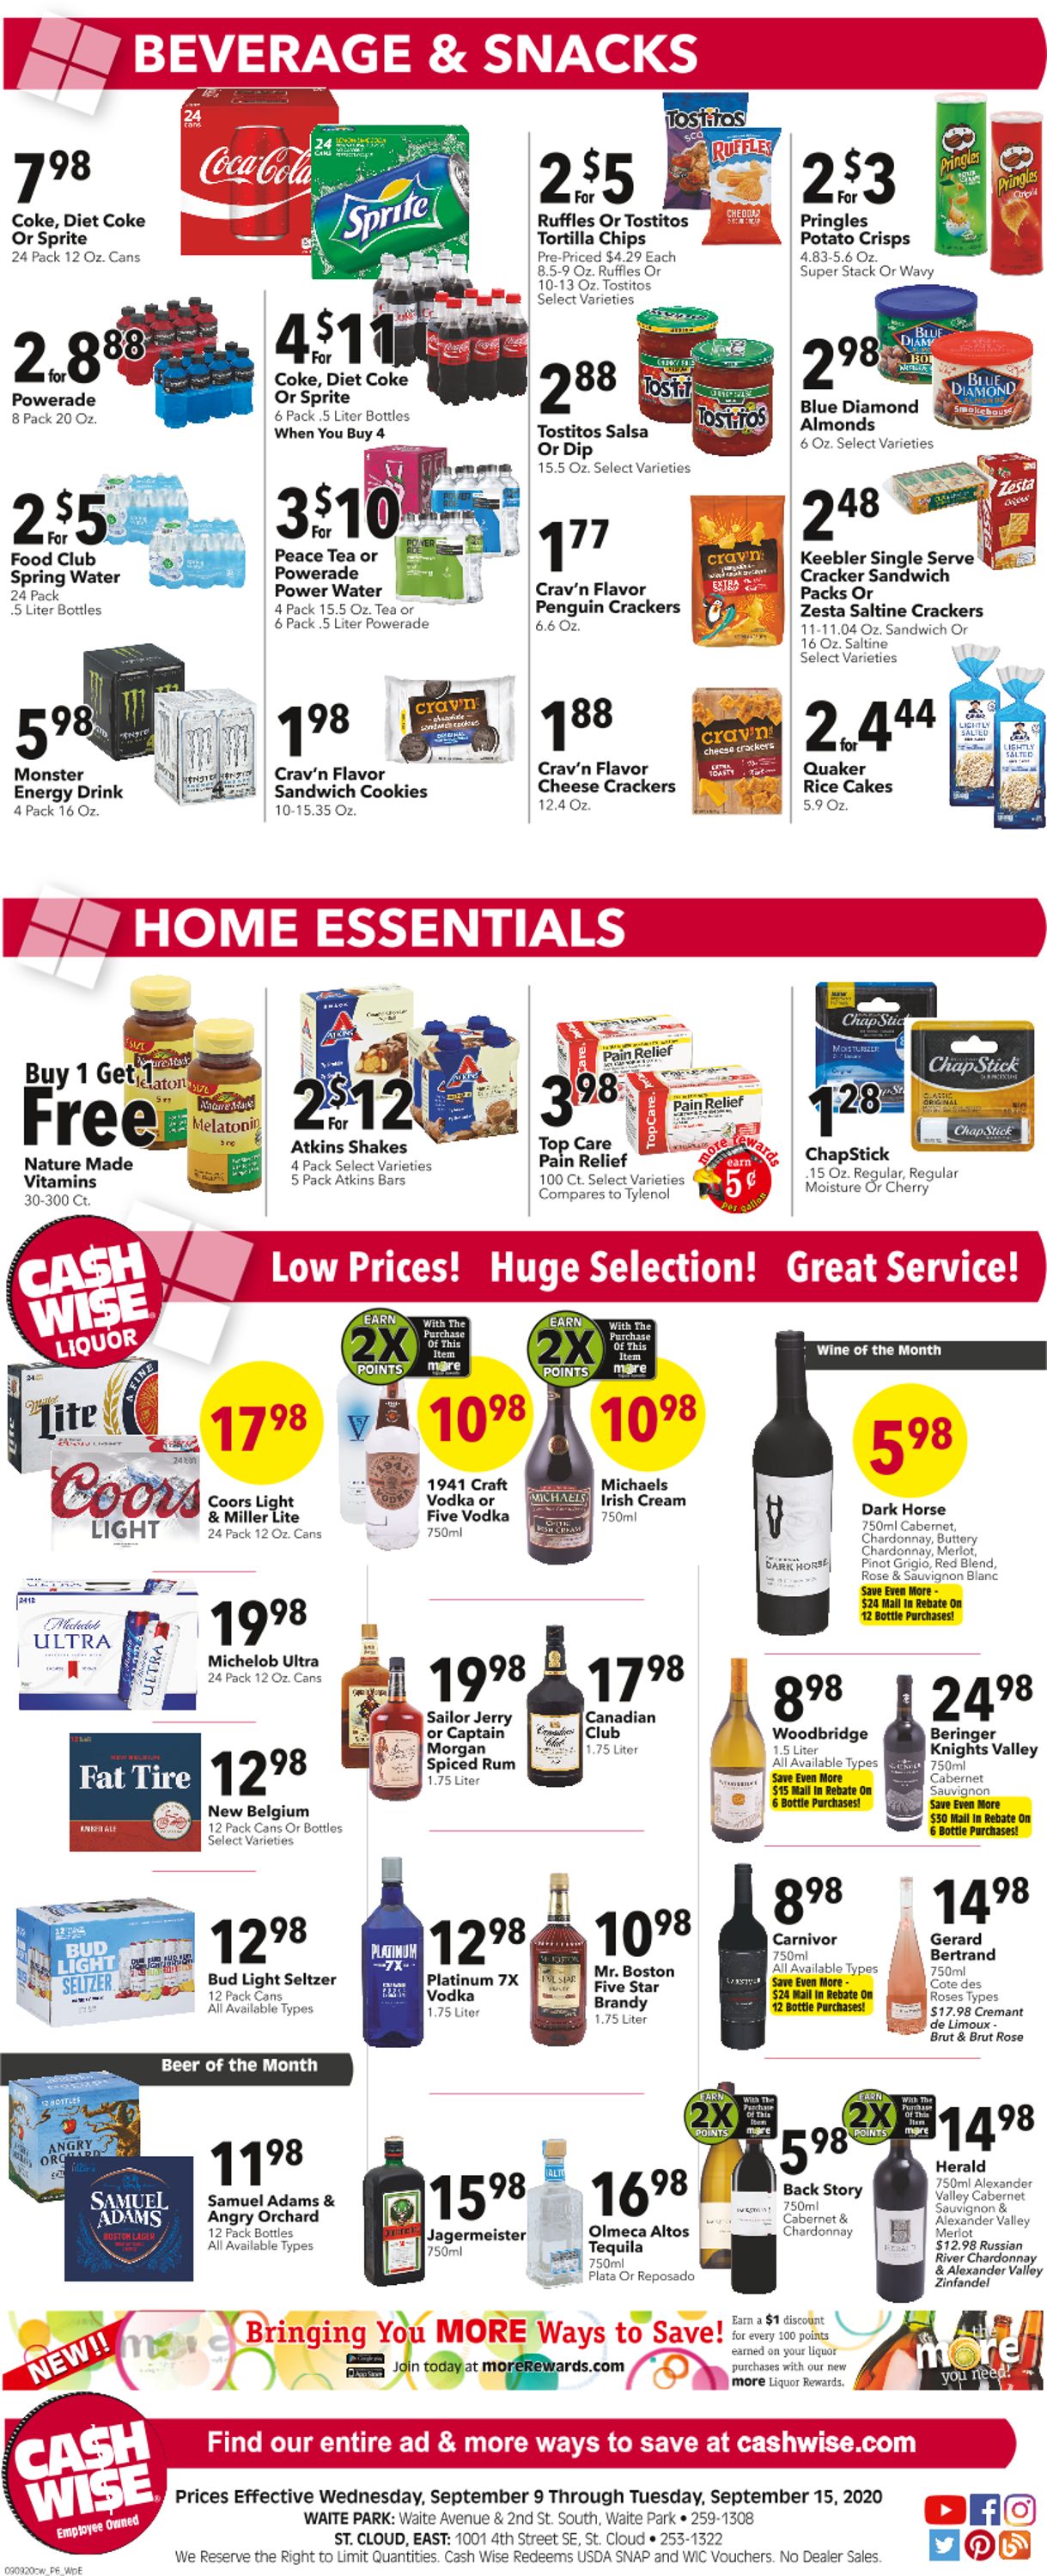 Cash Wise Weekly Ad Circular - valid 09/09-09/15/2020 (Page 4)